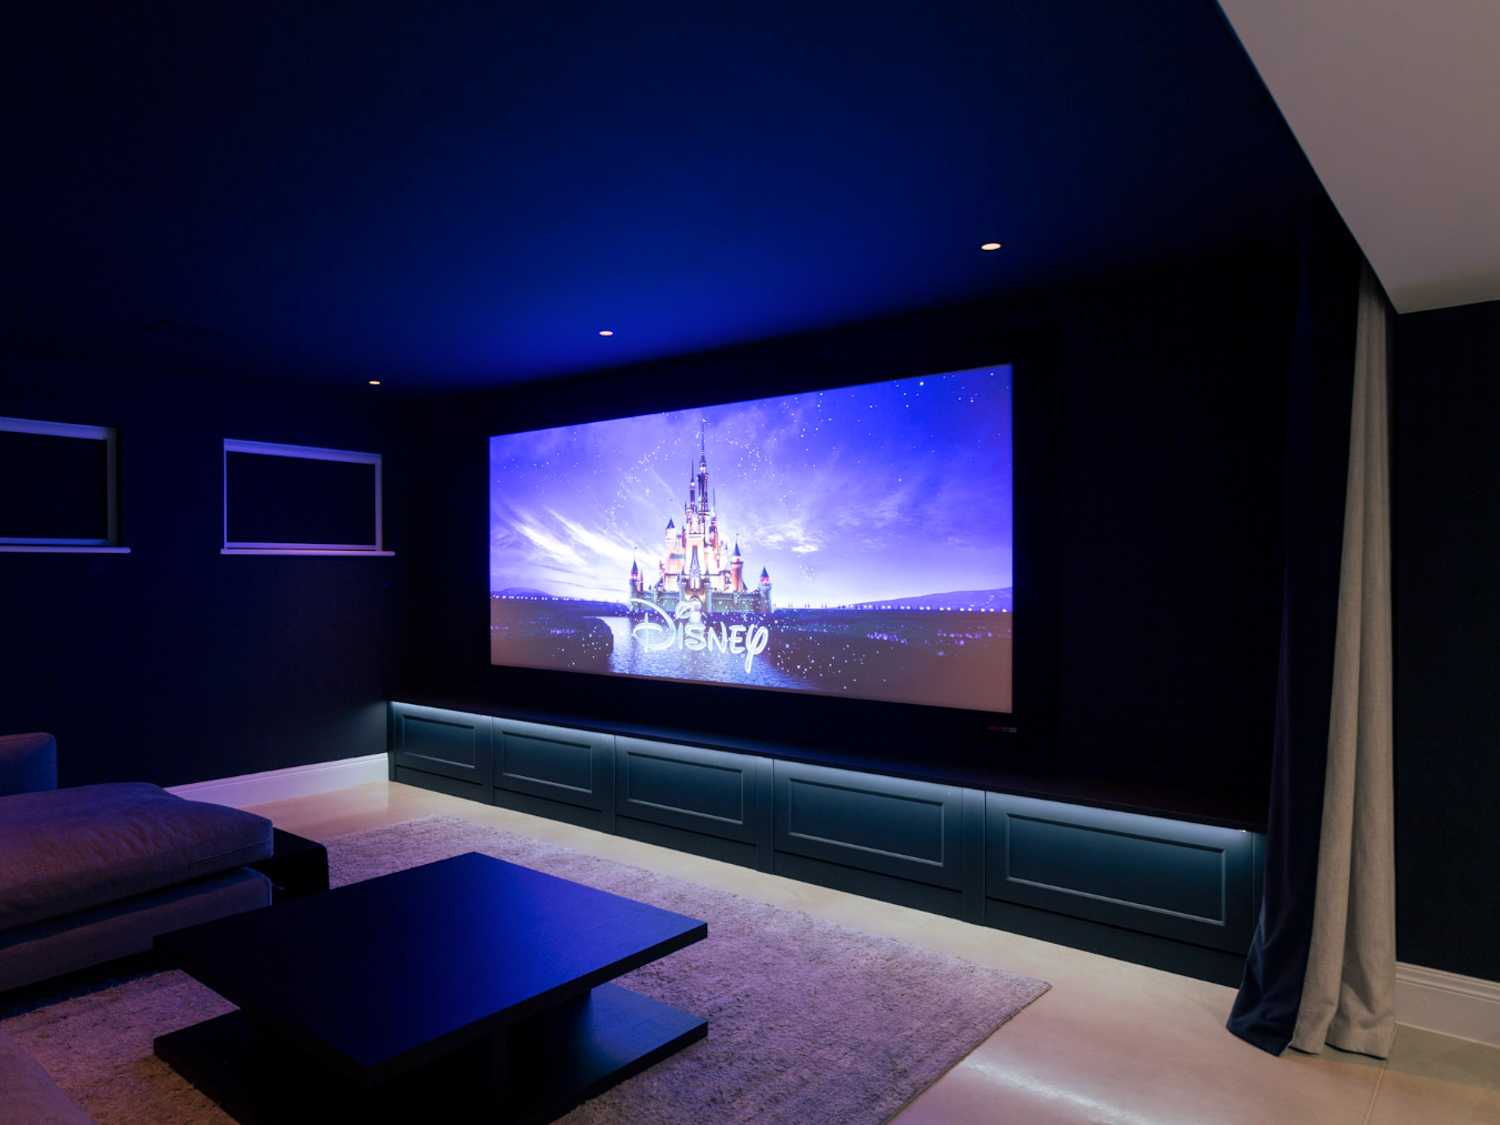 Dedicated home cinemas, 4K visuals, Dolby Atmos sound, lighting, seating and acoustic treatment